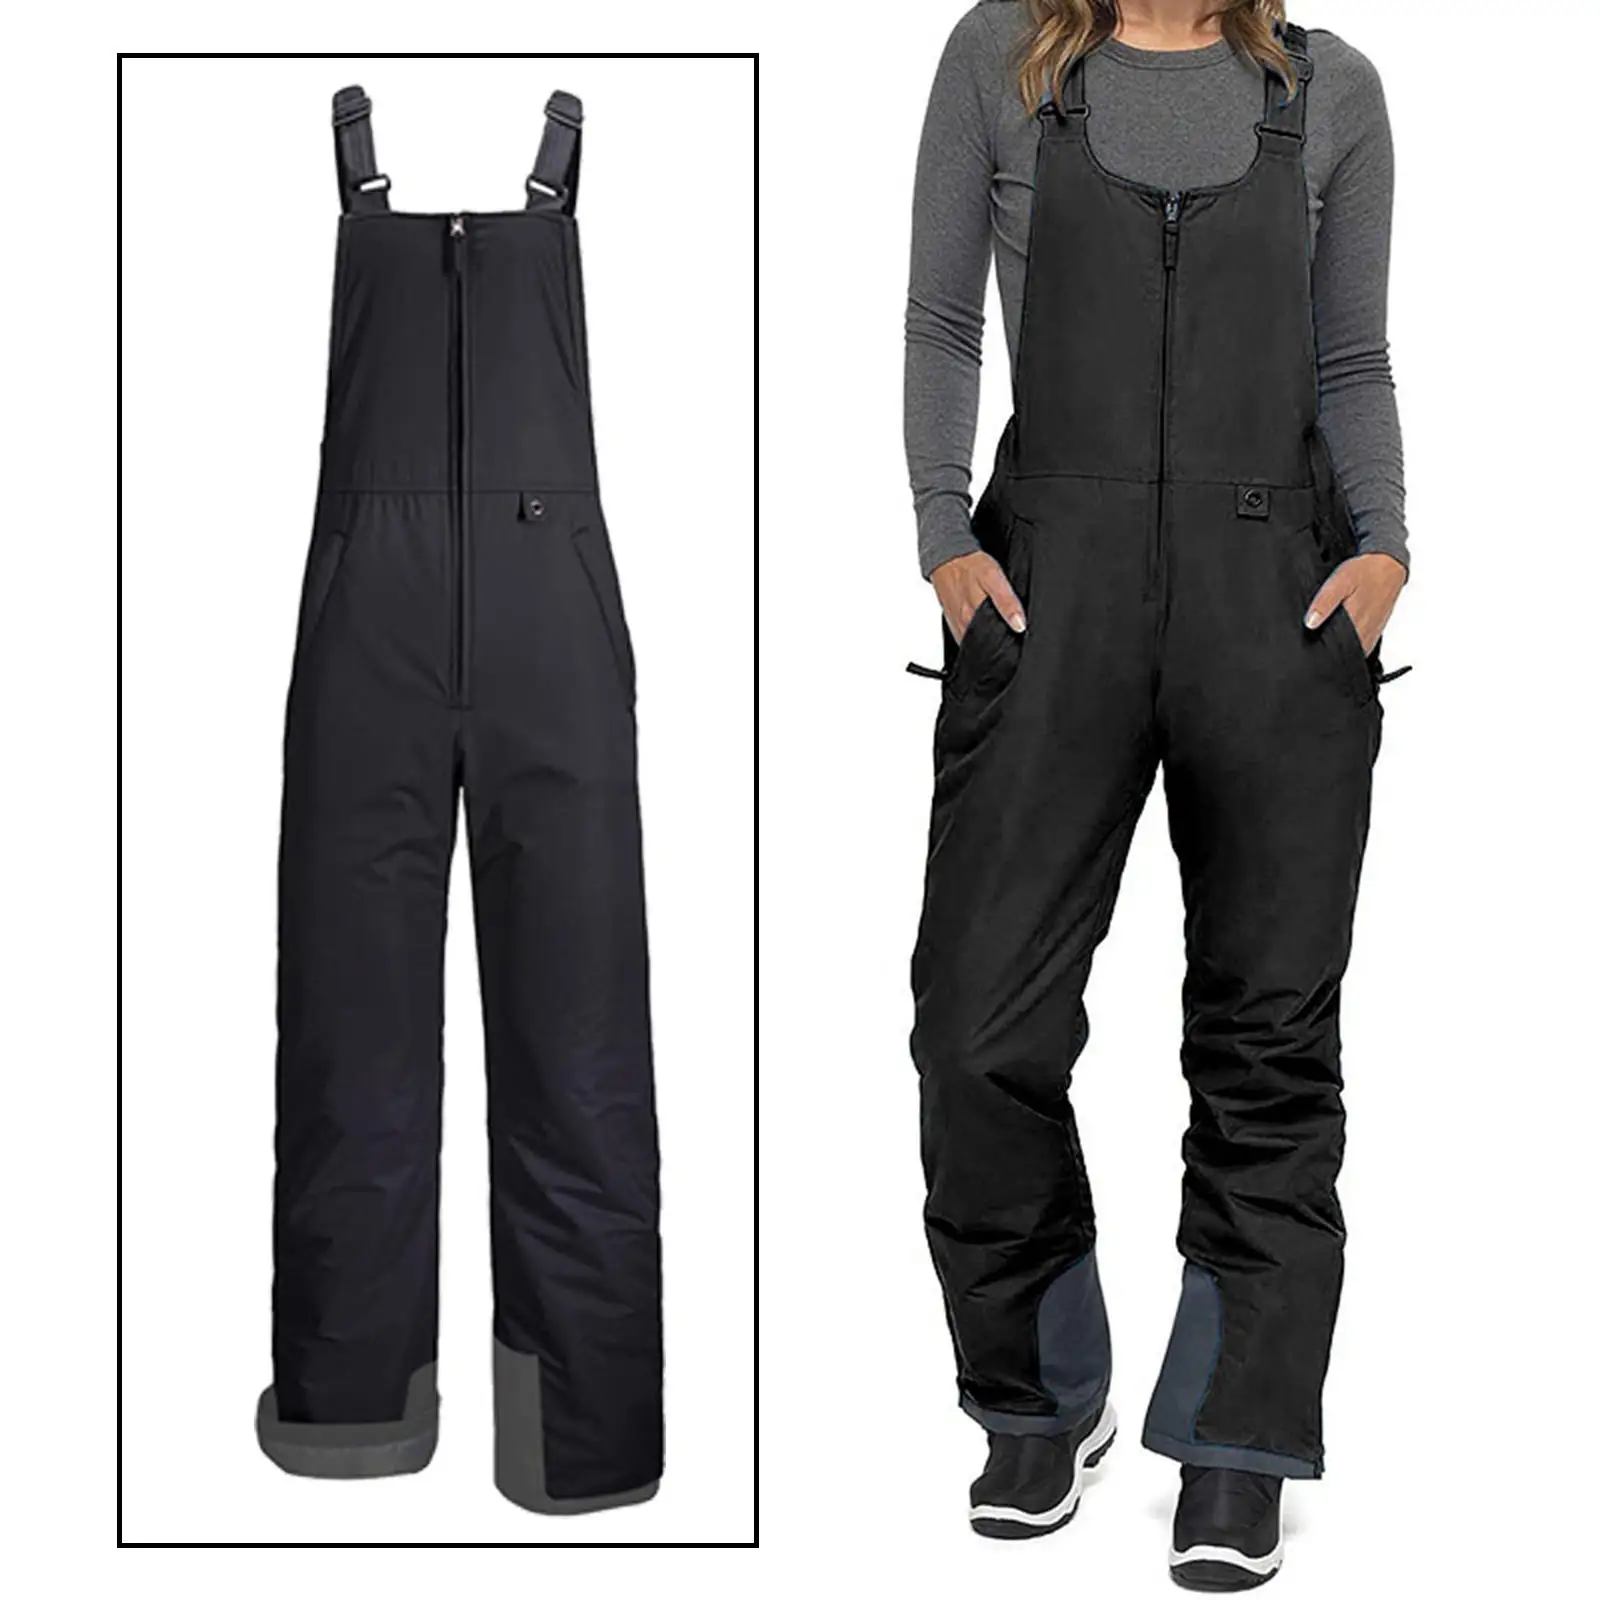 Ski Pants Water Resistant Lightweight Insulated Ripstop Full-Length Warm Trousers Snow Bibs Sled Skiing Pants Overalls for Women